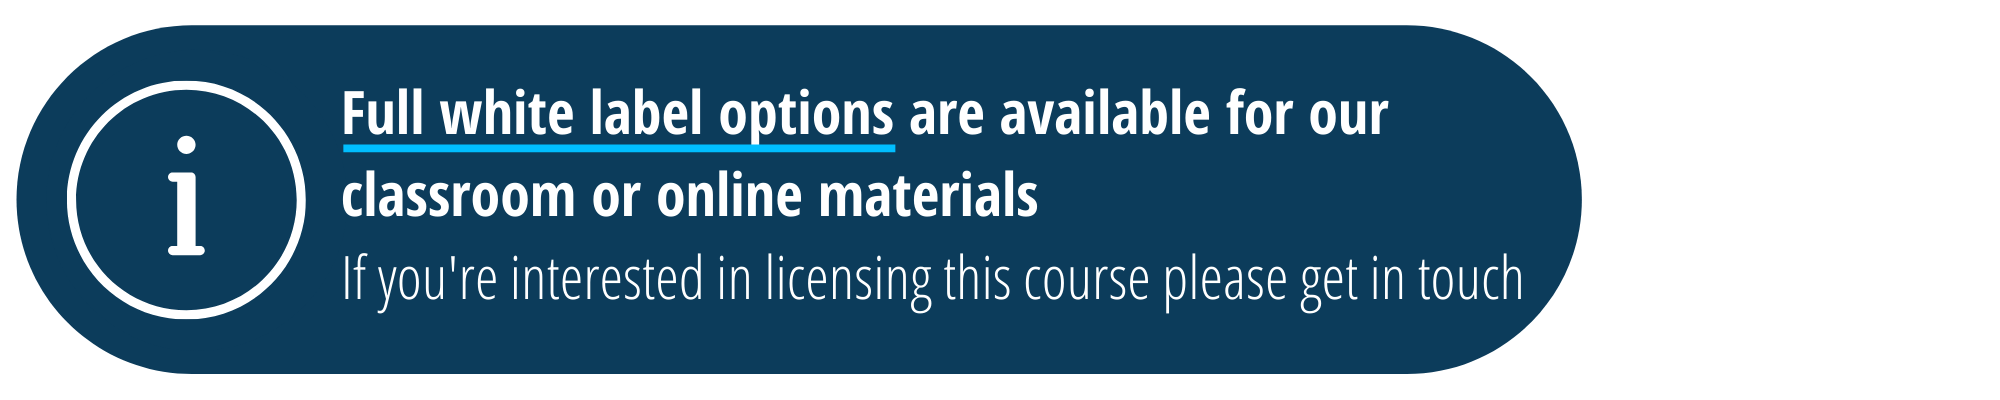 Enquire about licensing this course